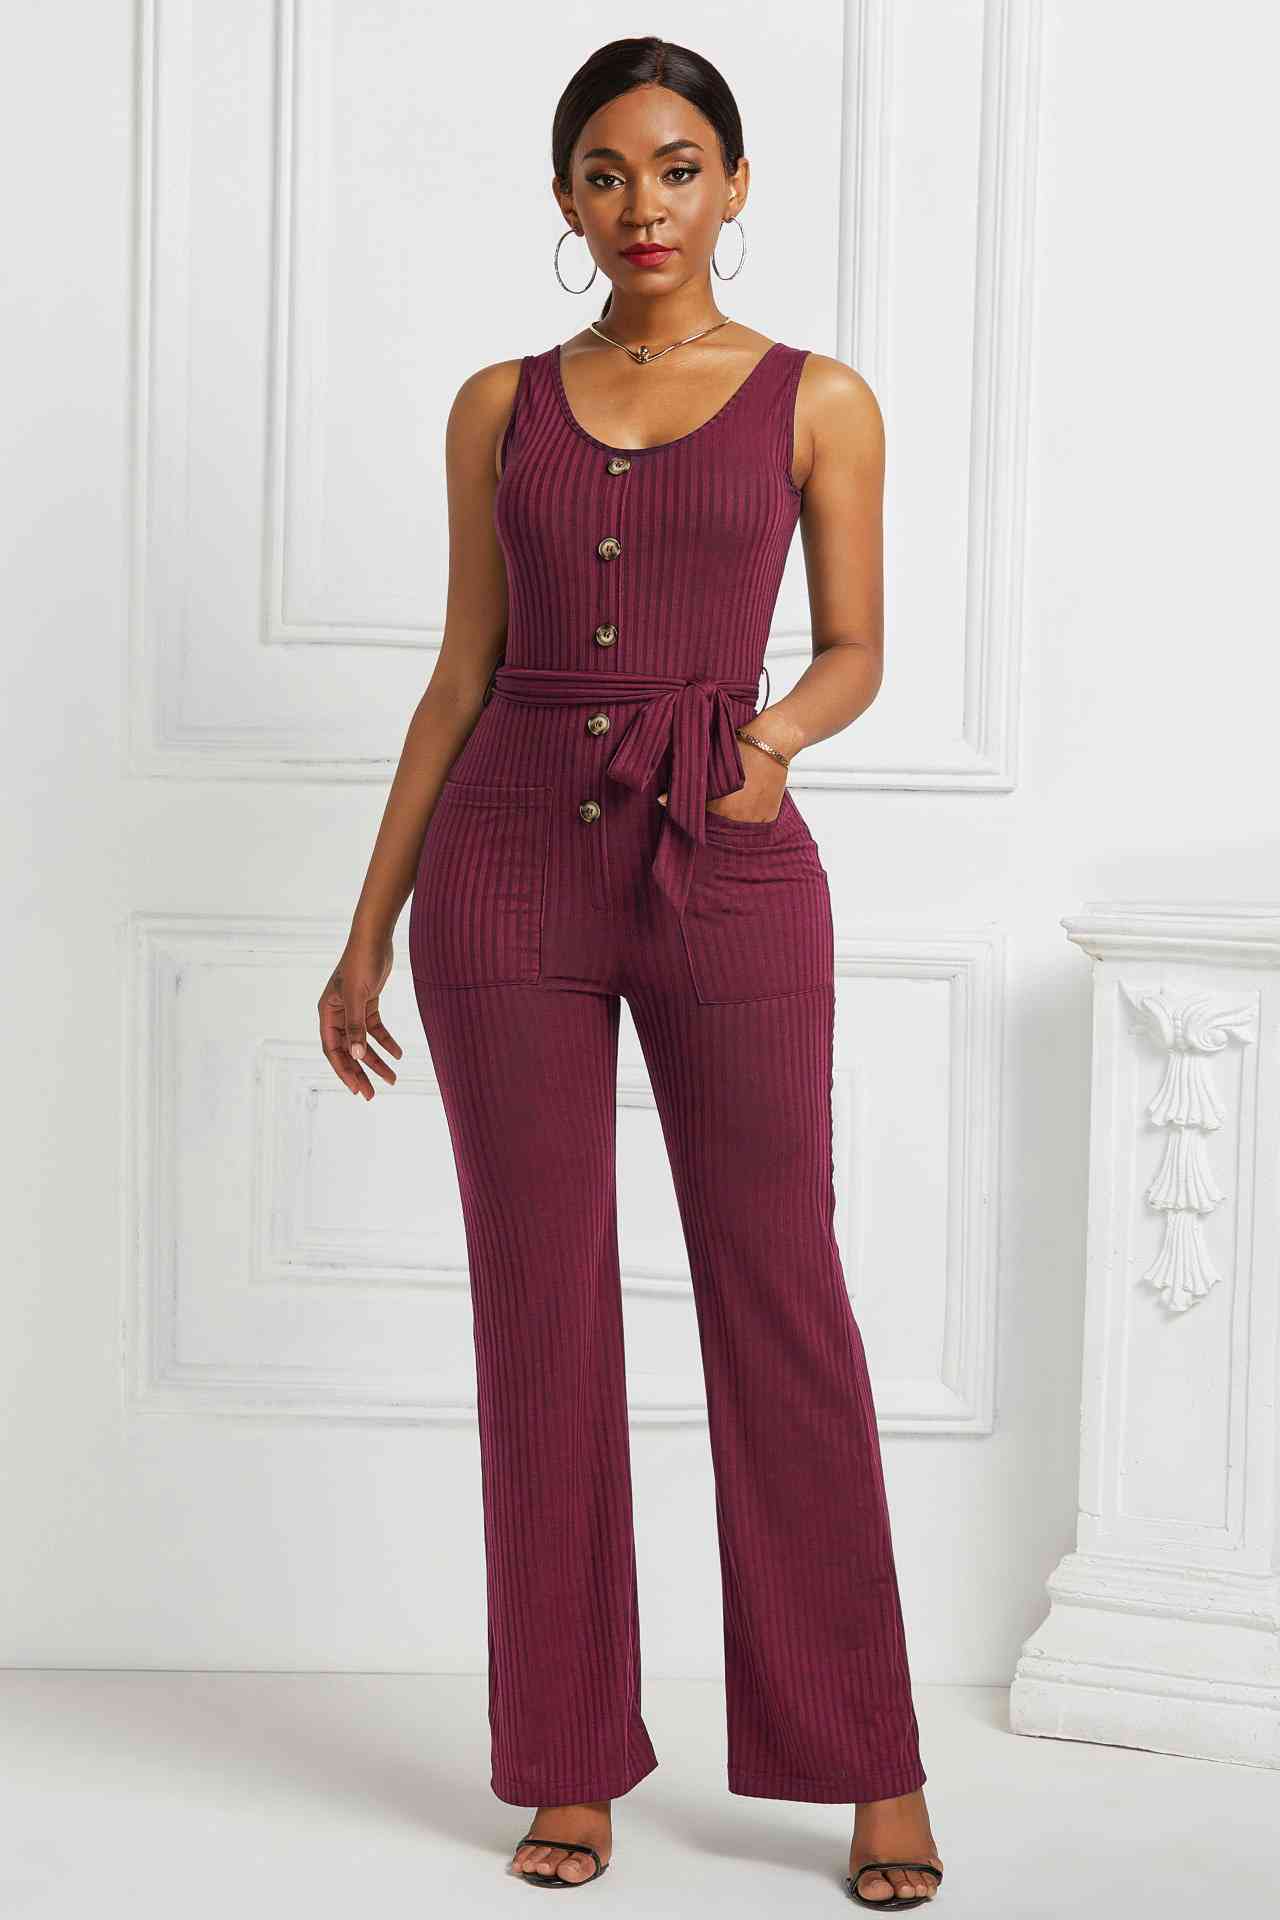 Button Detail Tie Waist Jumpsuit with Pockets - Wine / S Apparel & Accessories Wynter 4 All Seasons